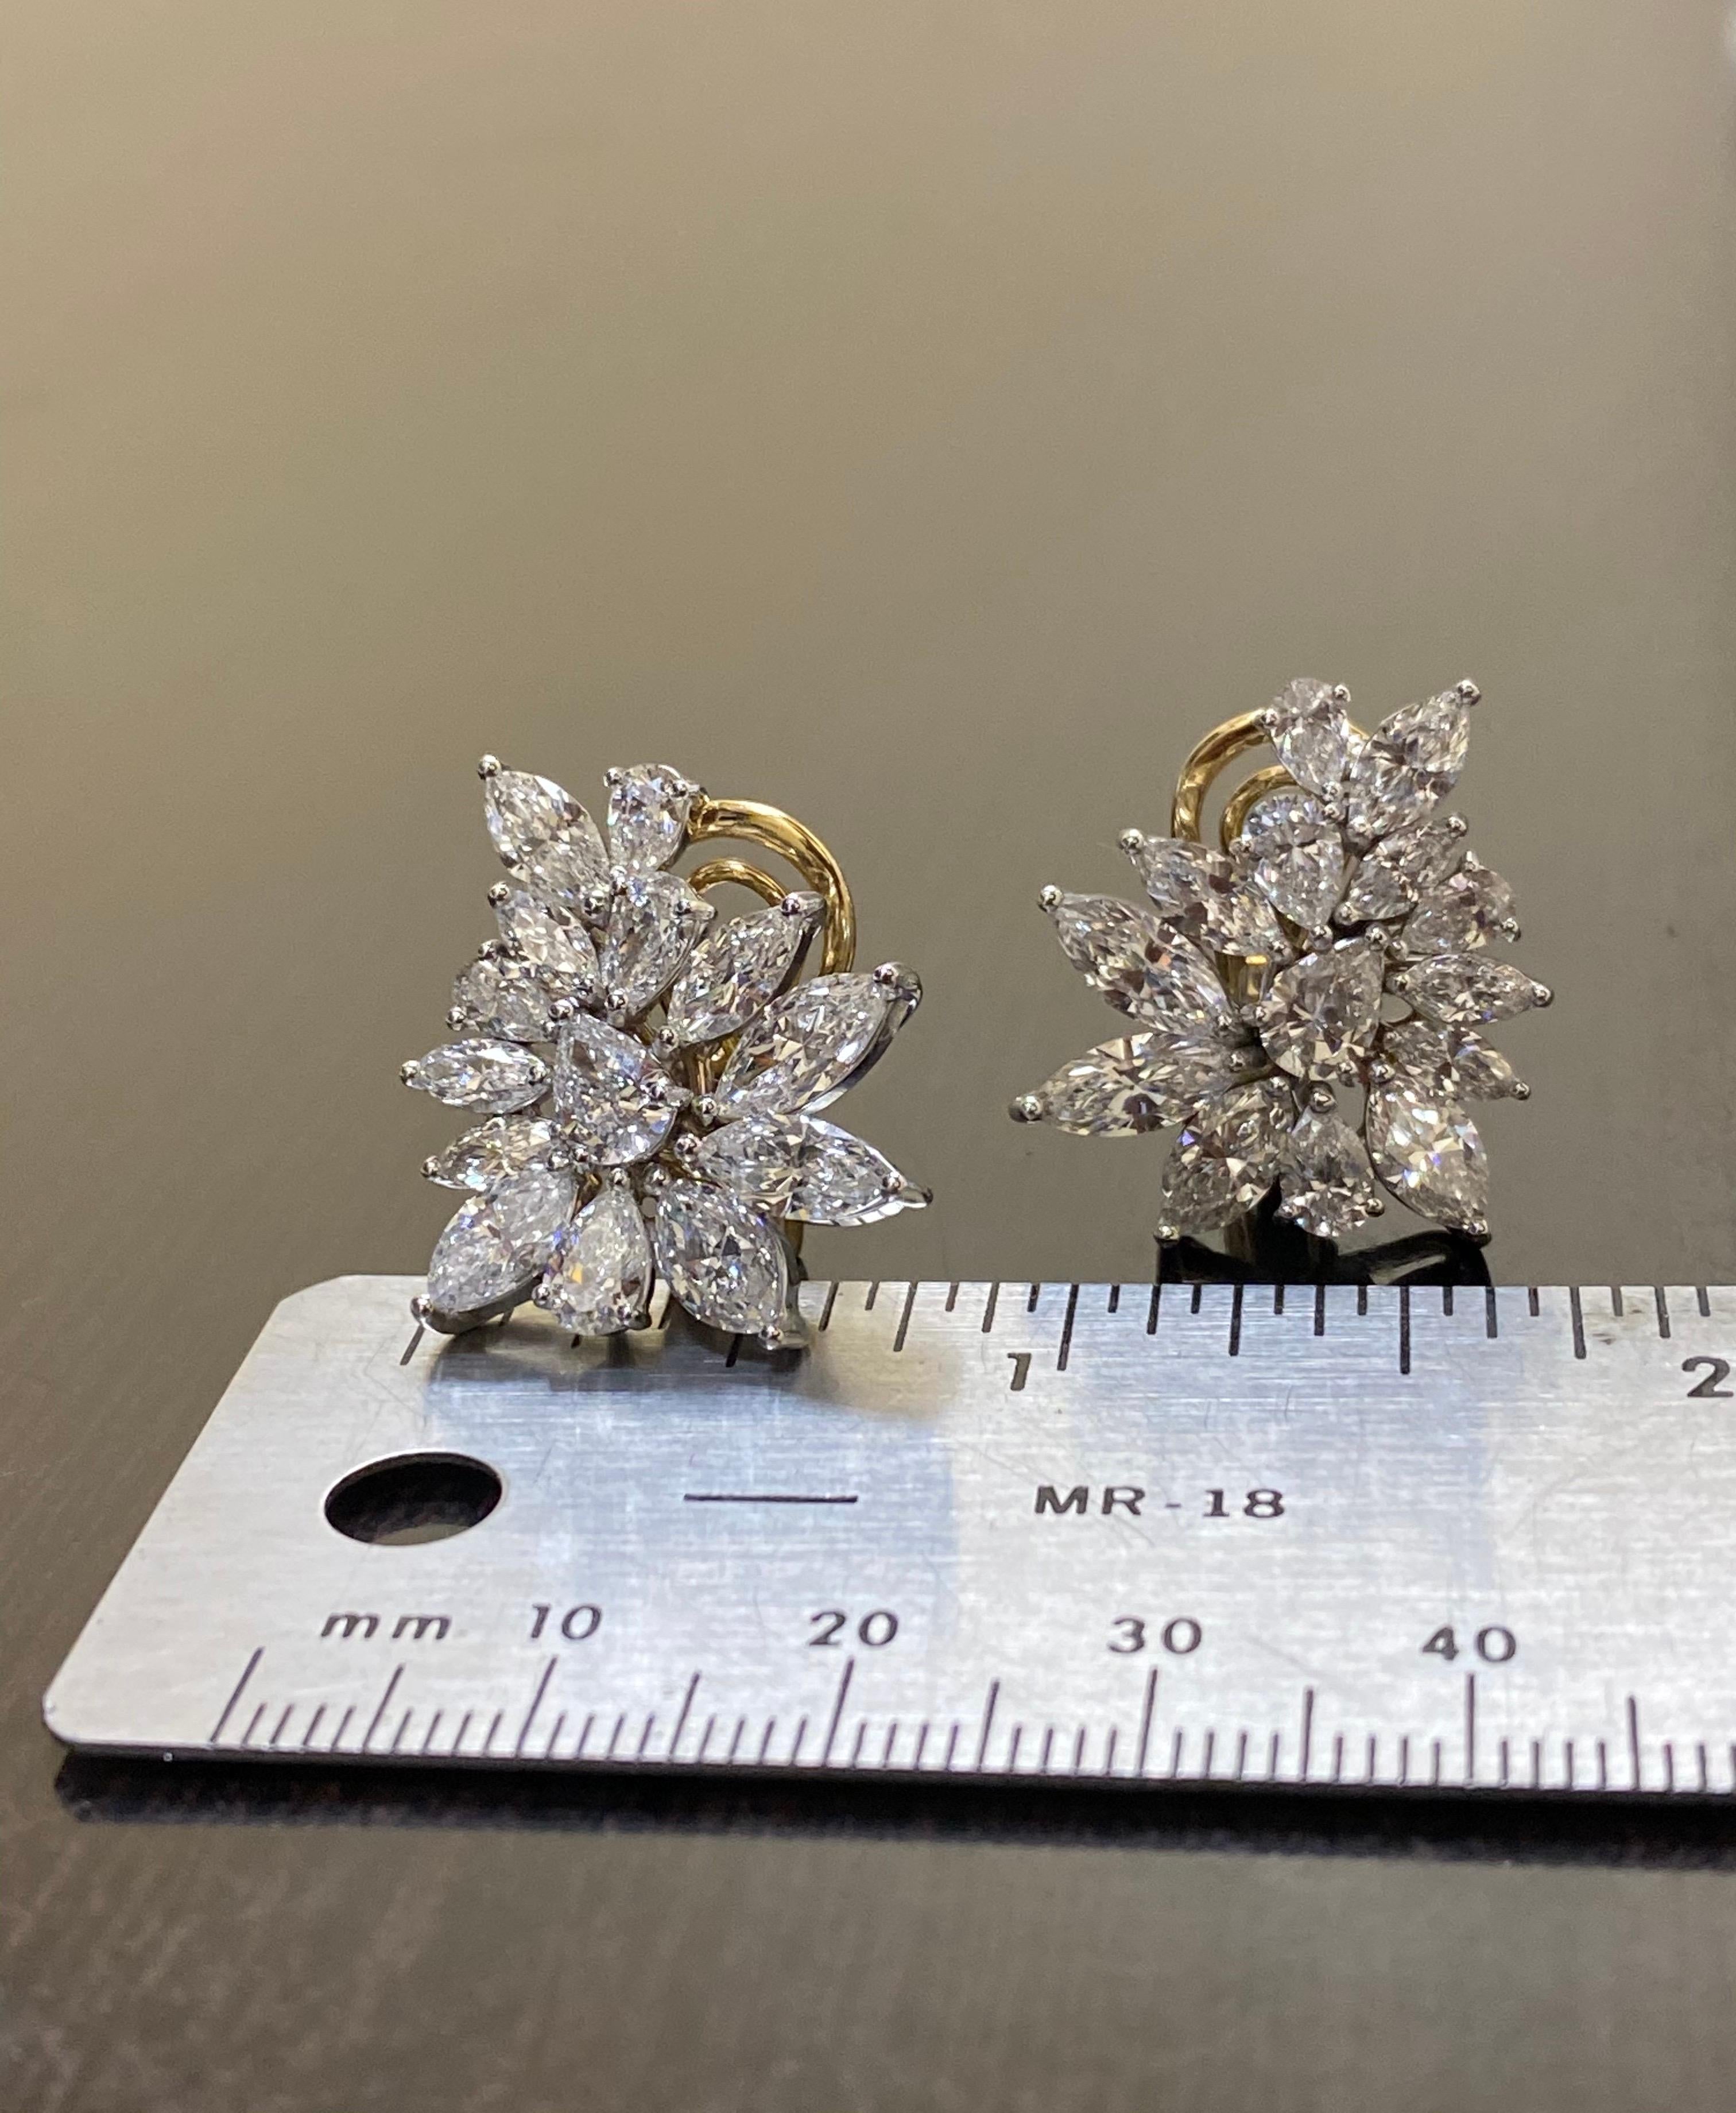 DeKara Design Collection

Metals- 18K White Gold, 18K Yellow Gold, .750.

Stones- 18 Marquise Diamonds, 10 Pear Shape Diamonds, Mostly Colorless E-F Color Diamonds, Average VS2-SI1 Clarity 9 Carats.

These Earrings Took Over a Month and a Half to